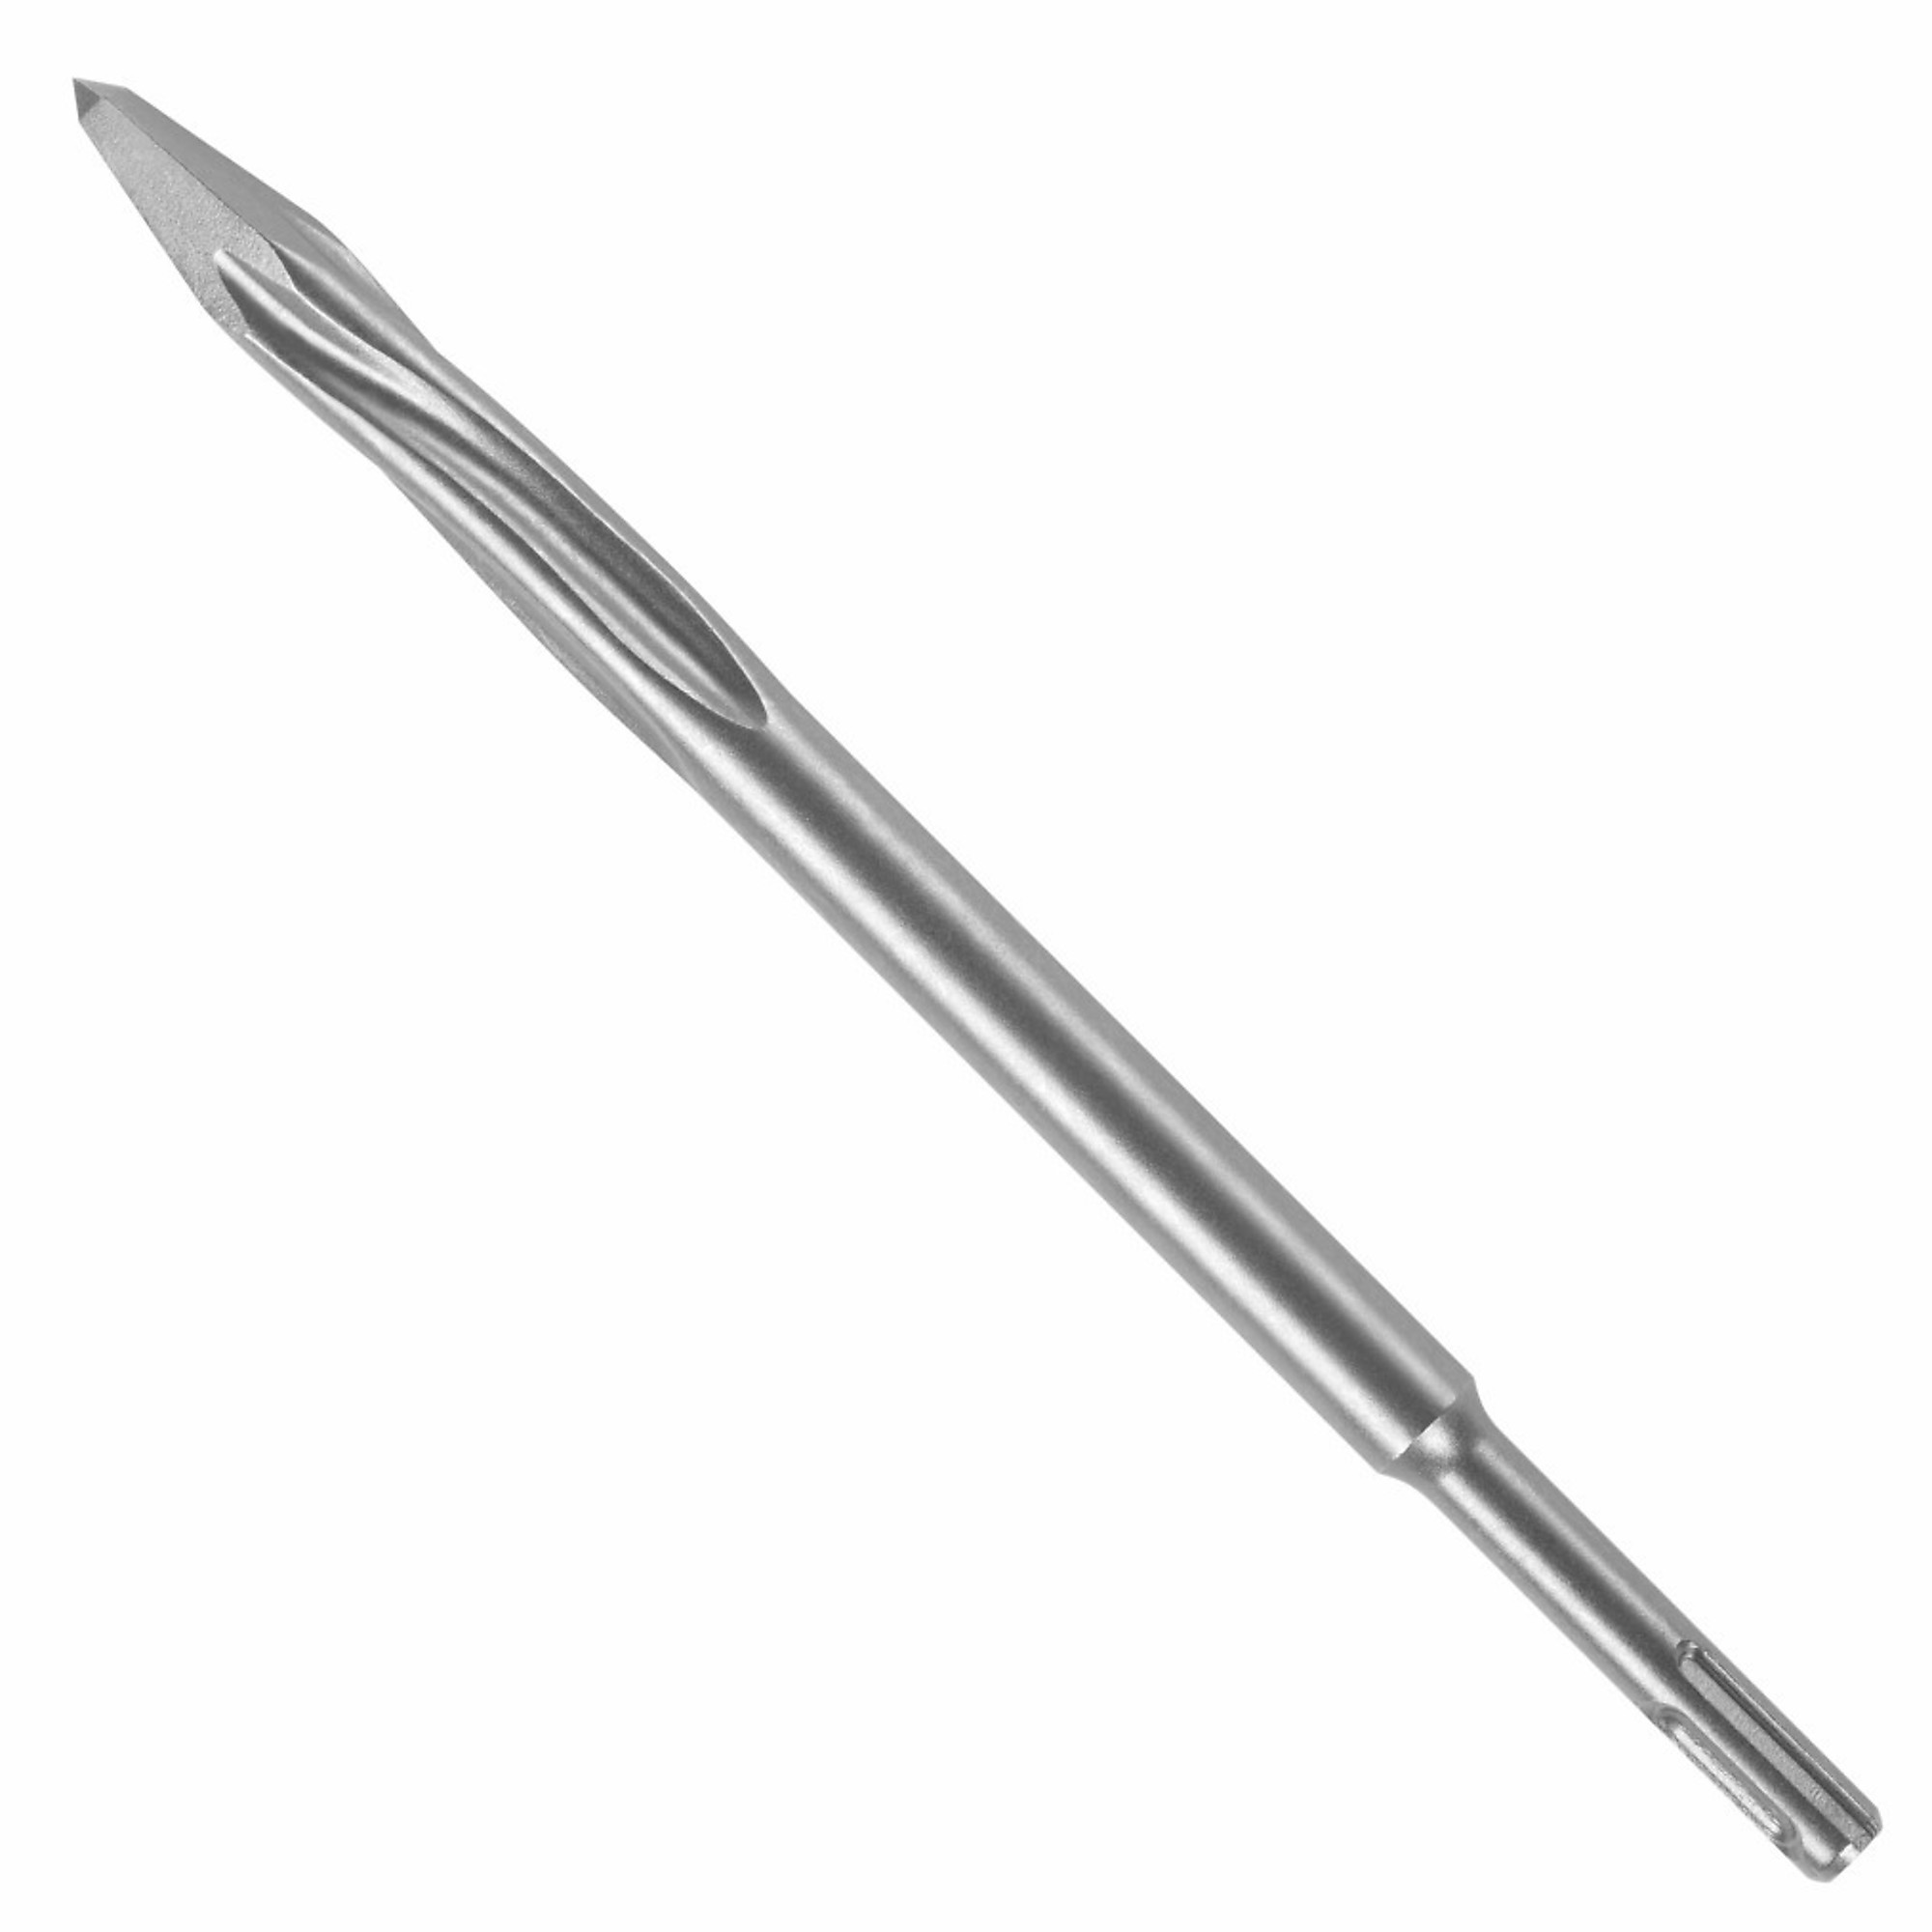 Bosch, SDS-PLUS POINTED CHISEL, Width 1.6 in, Length 0.55 in, Material Steel, Model HS1472